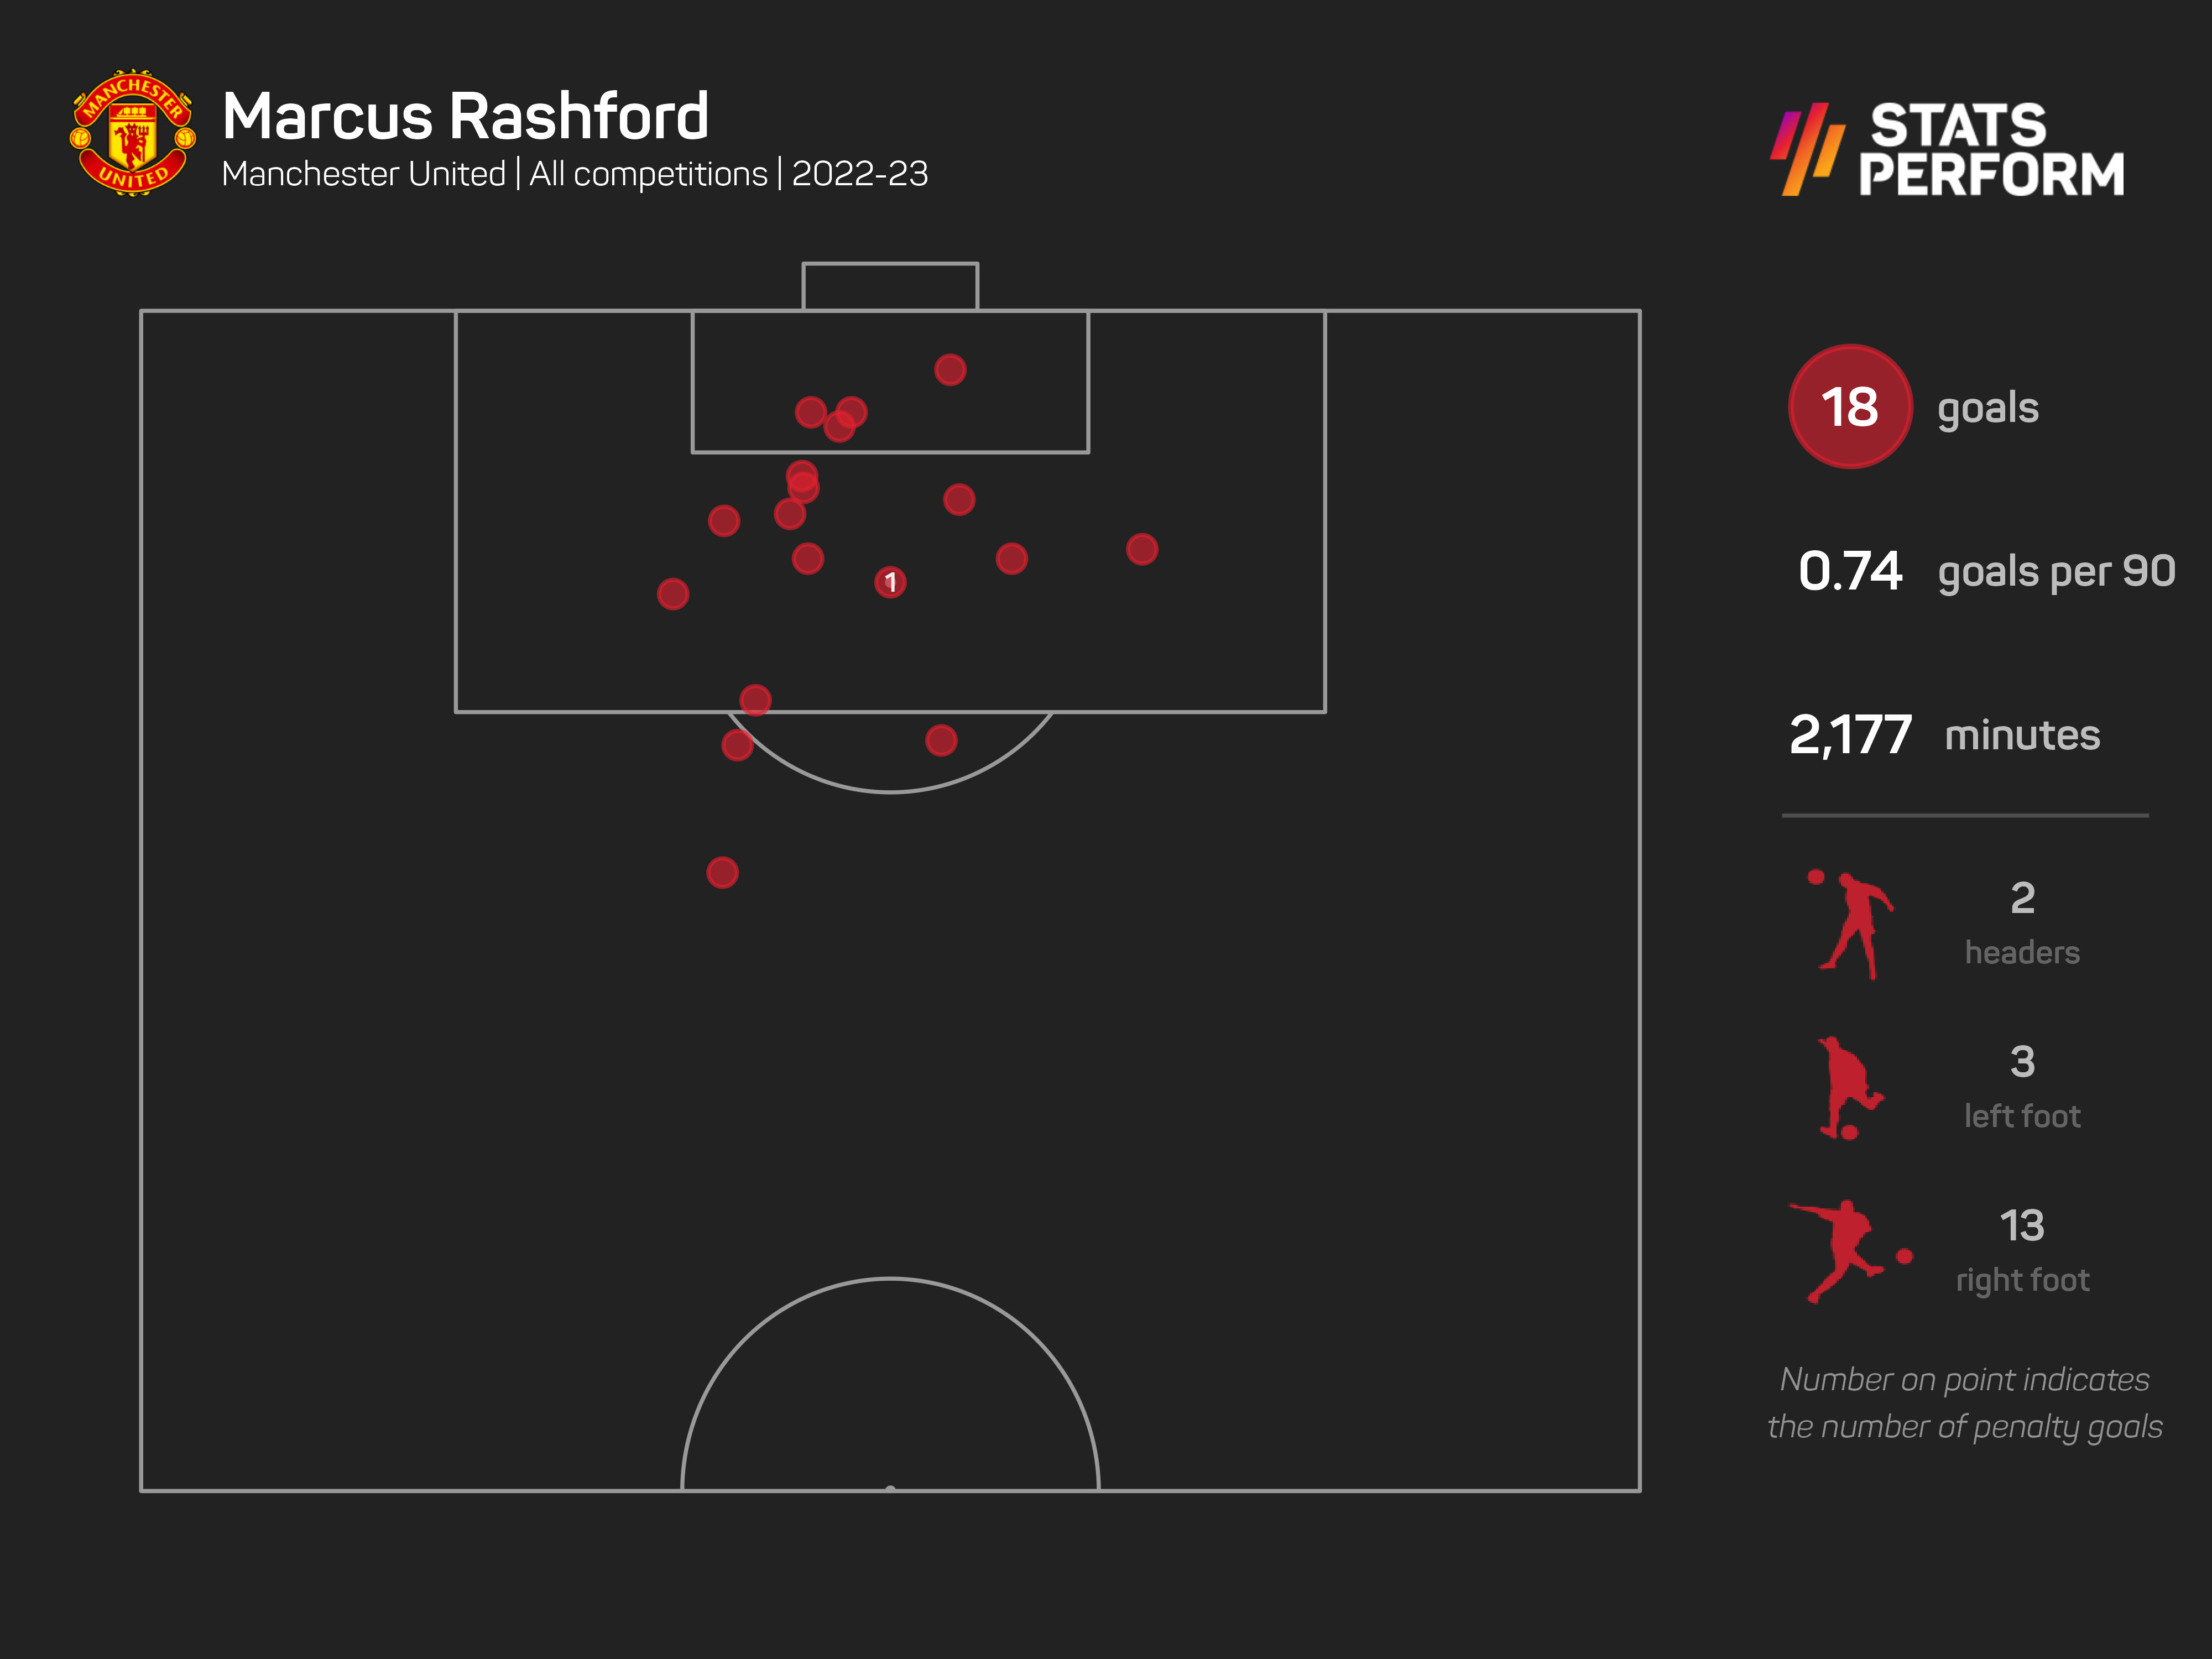 Marcus Rashford has been in superb form for Manchester United this season